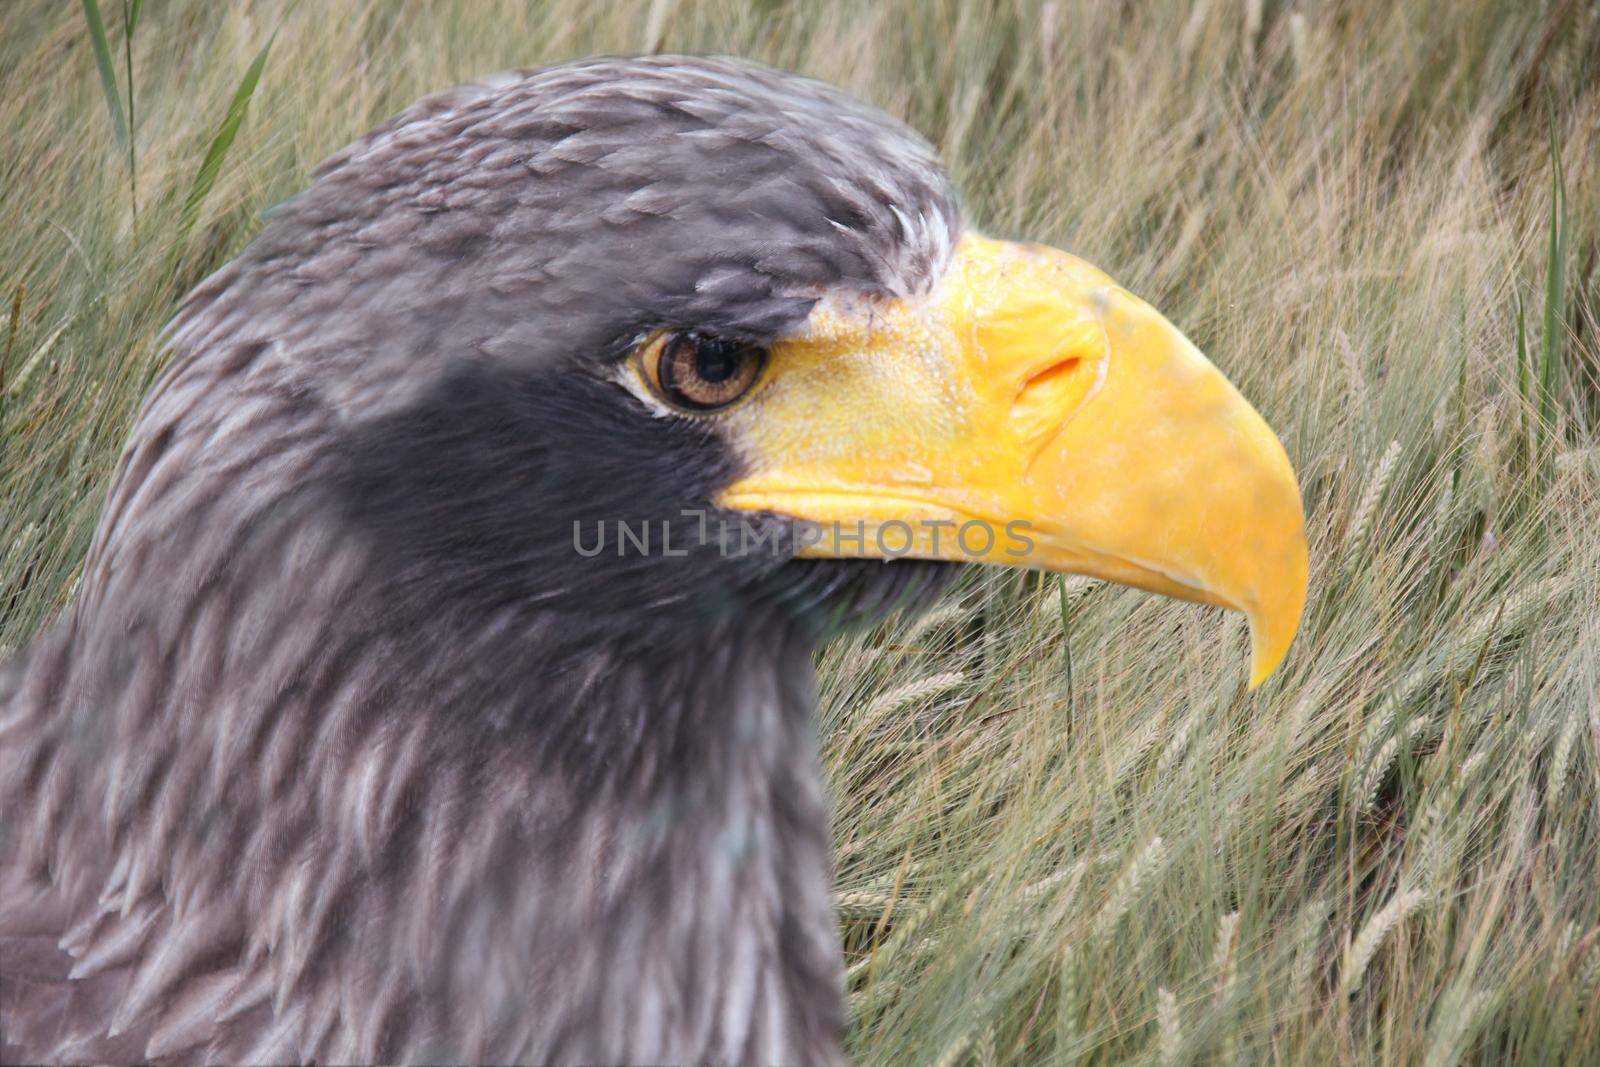 A close up of a bird of prey. His head is black and his huge beak is yellow